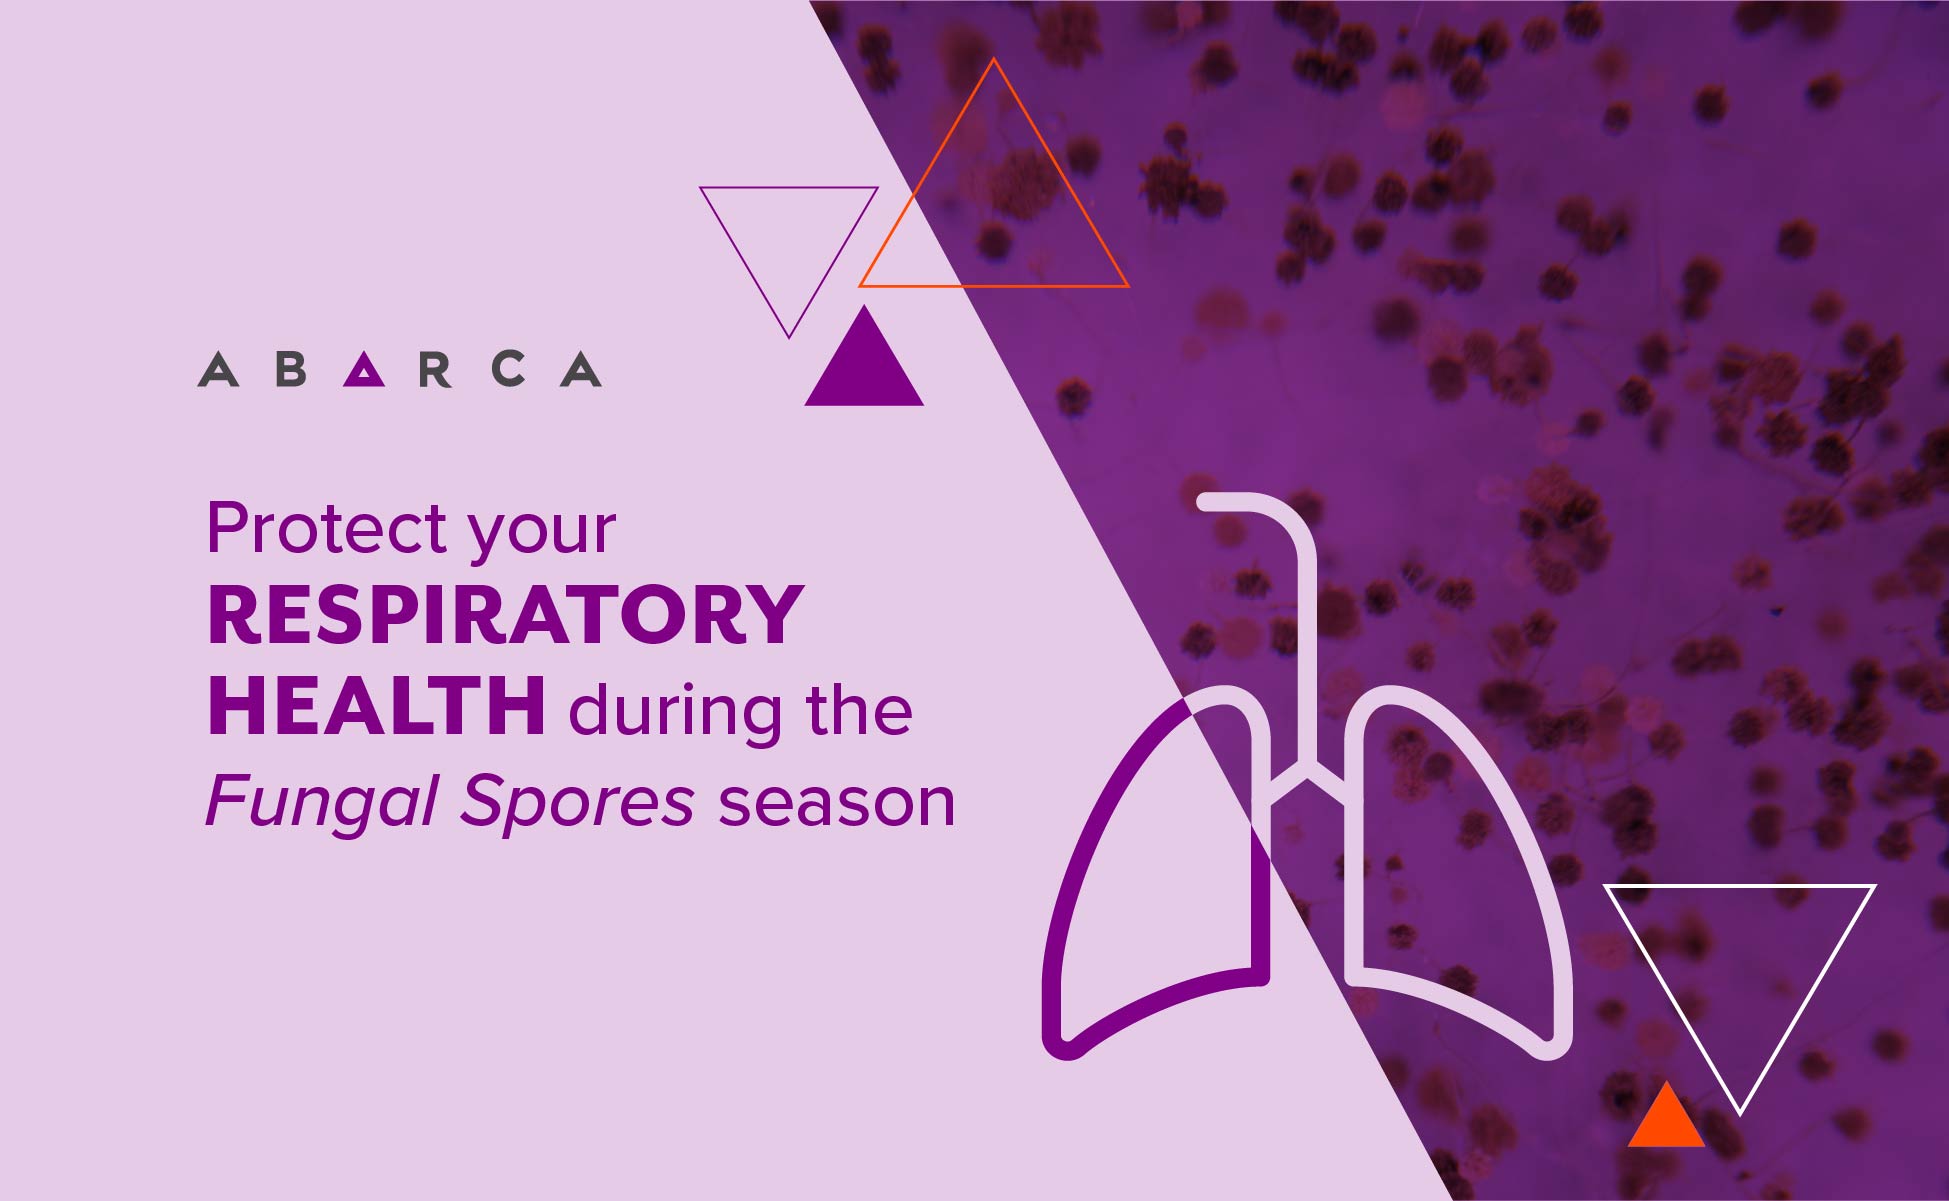 Abarca Health: Protect your respiratory health during the fungal spores season